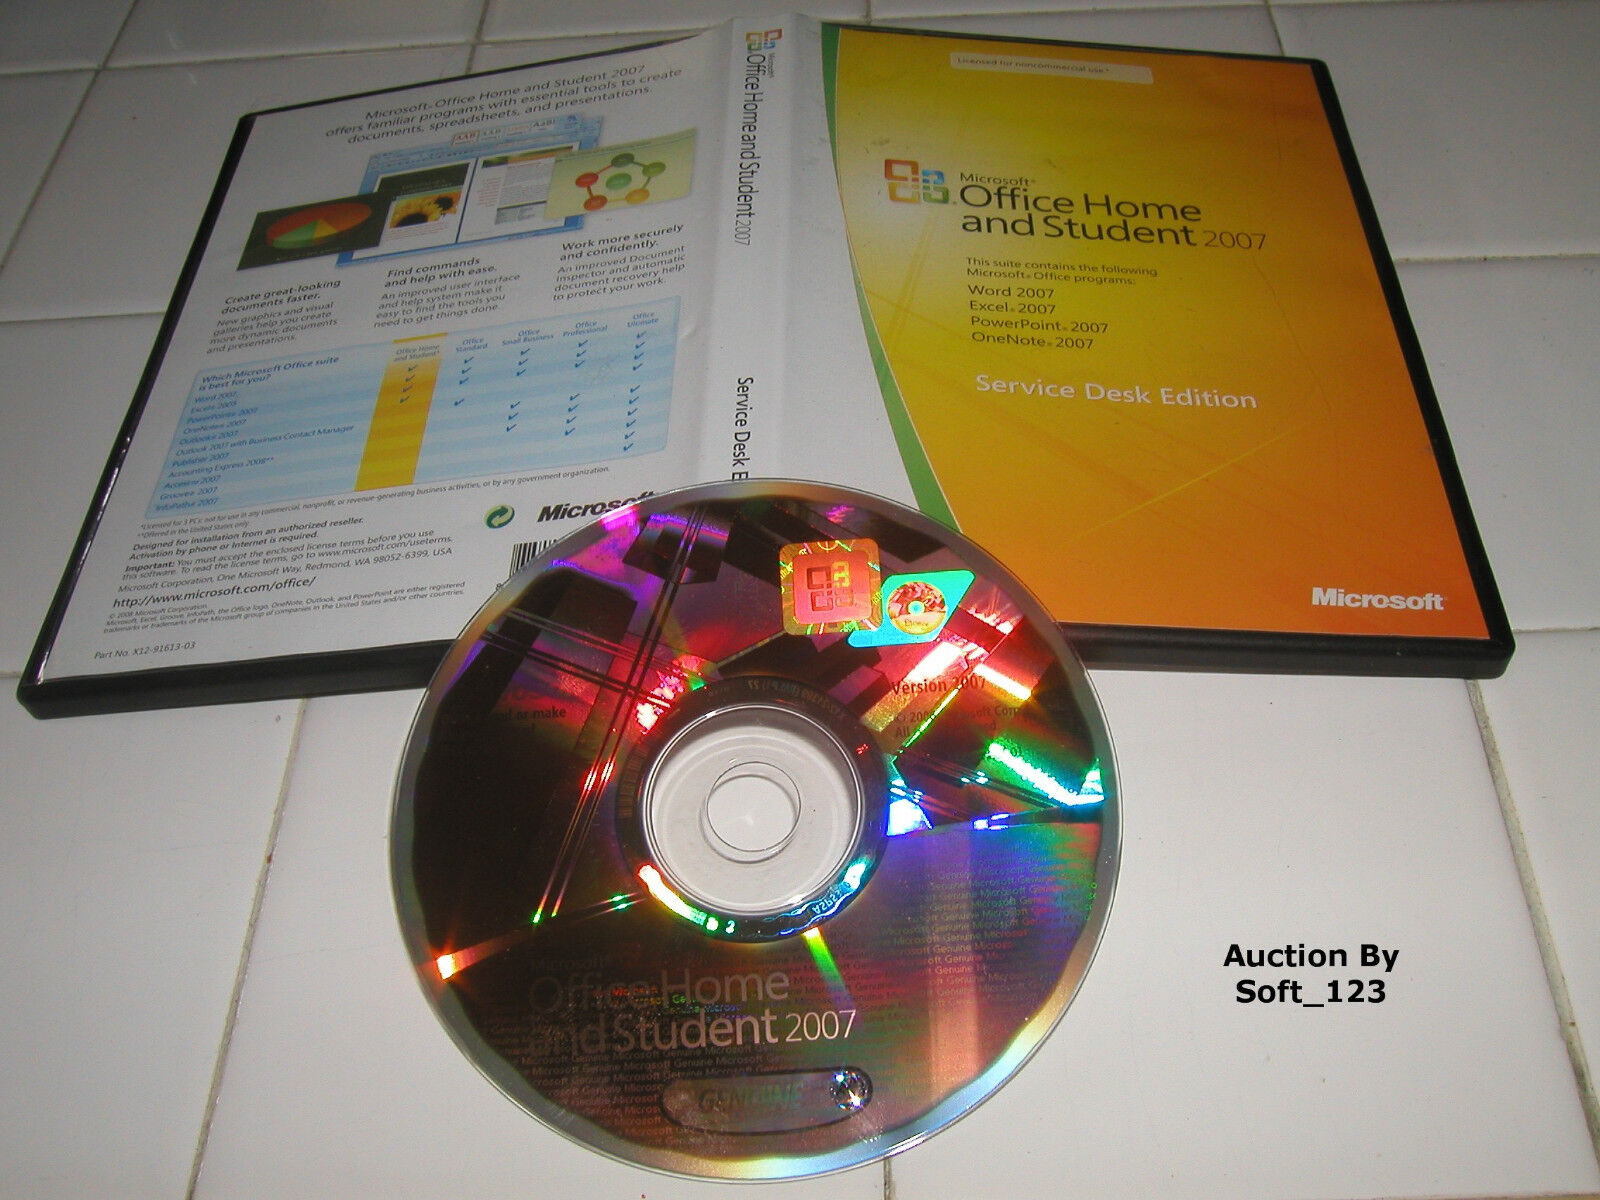 MS Microsoft Office 2007 Home and Student for 3 PCs Full Retail English Version